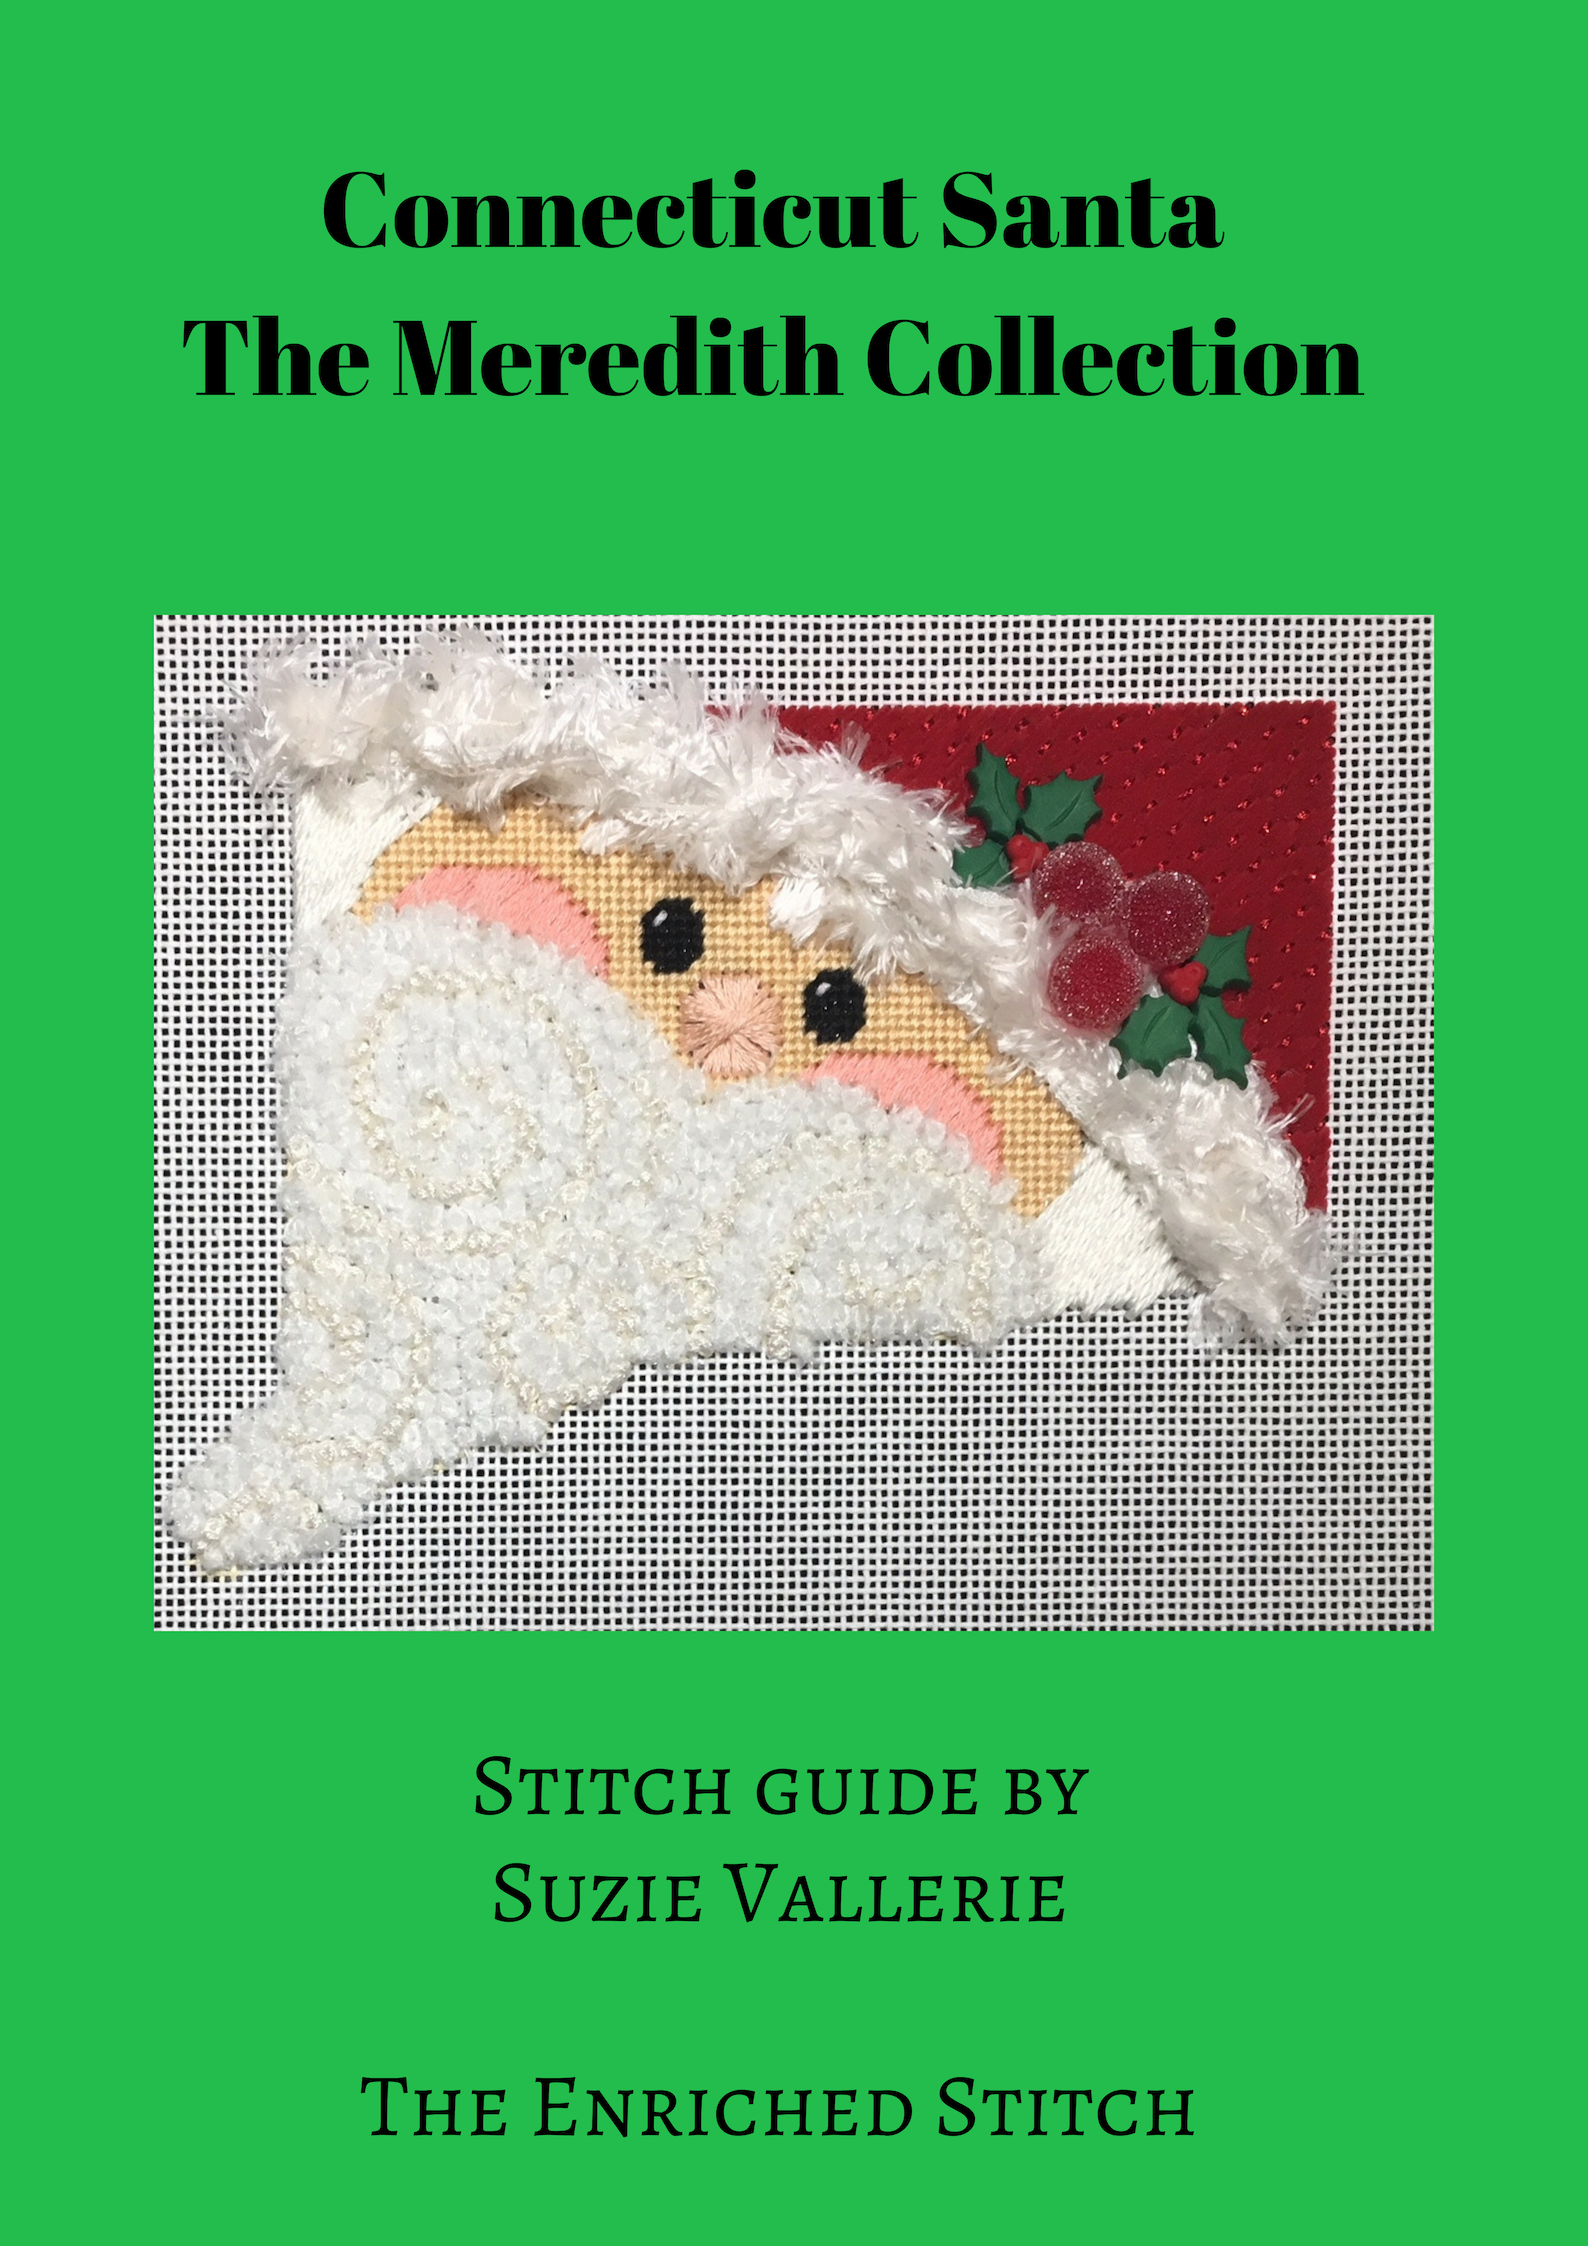 Mary's Whimsical Stitches Volume 1 – The Enriched Stitch